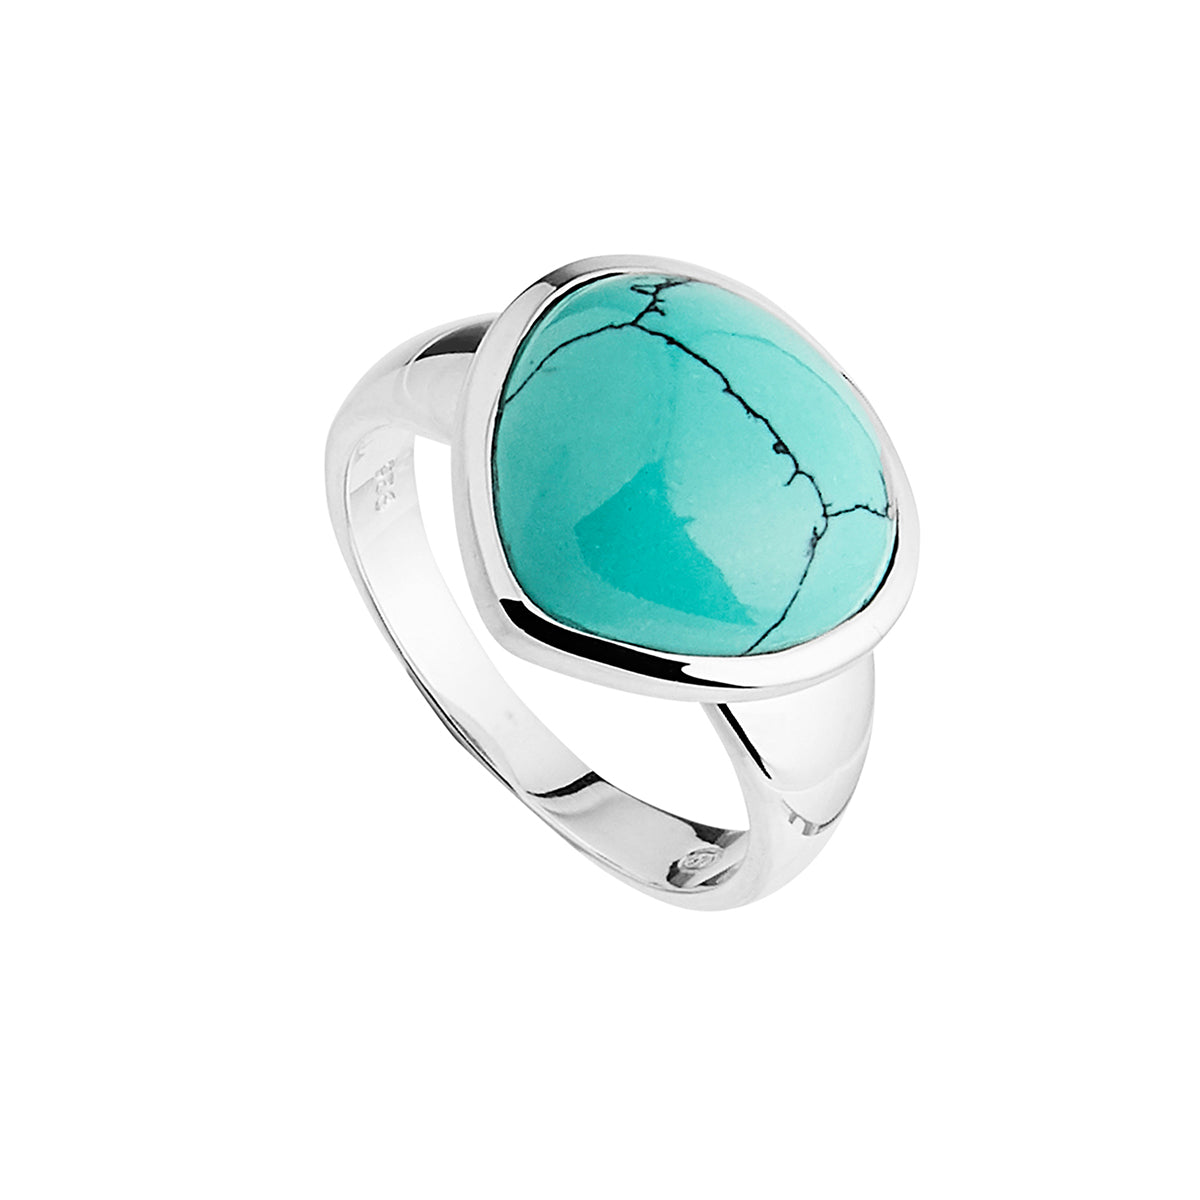 Silver, recon Turquoise triangular ring